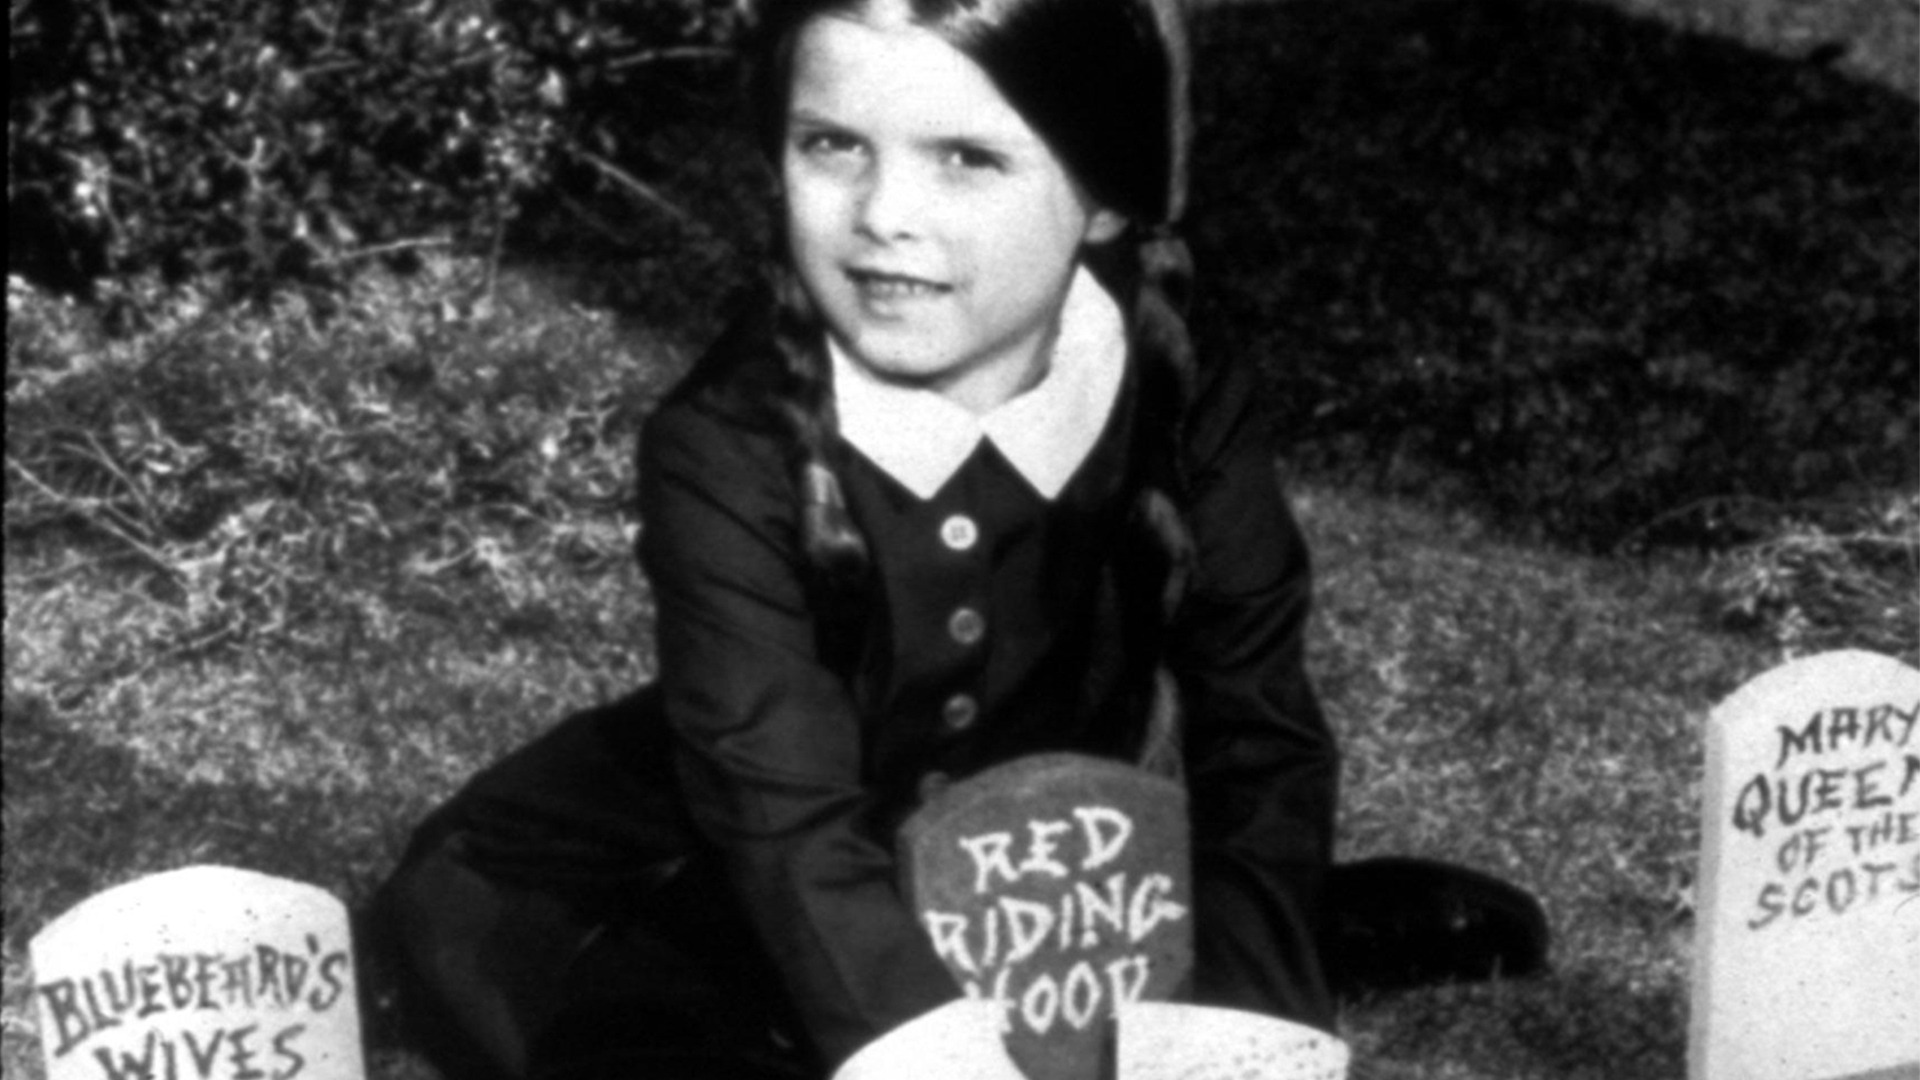 Wednesday Addams from the '60s